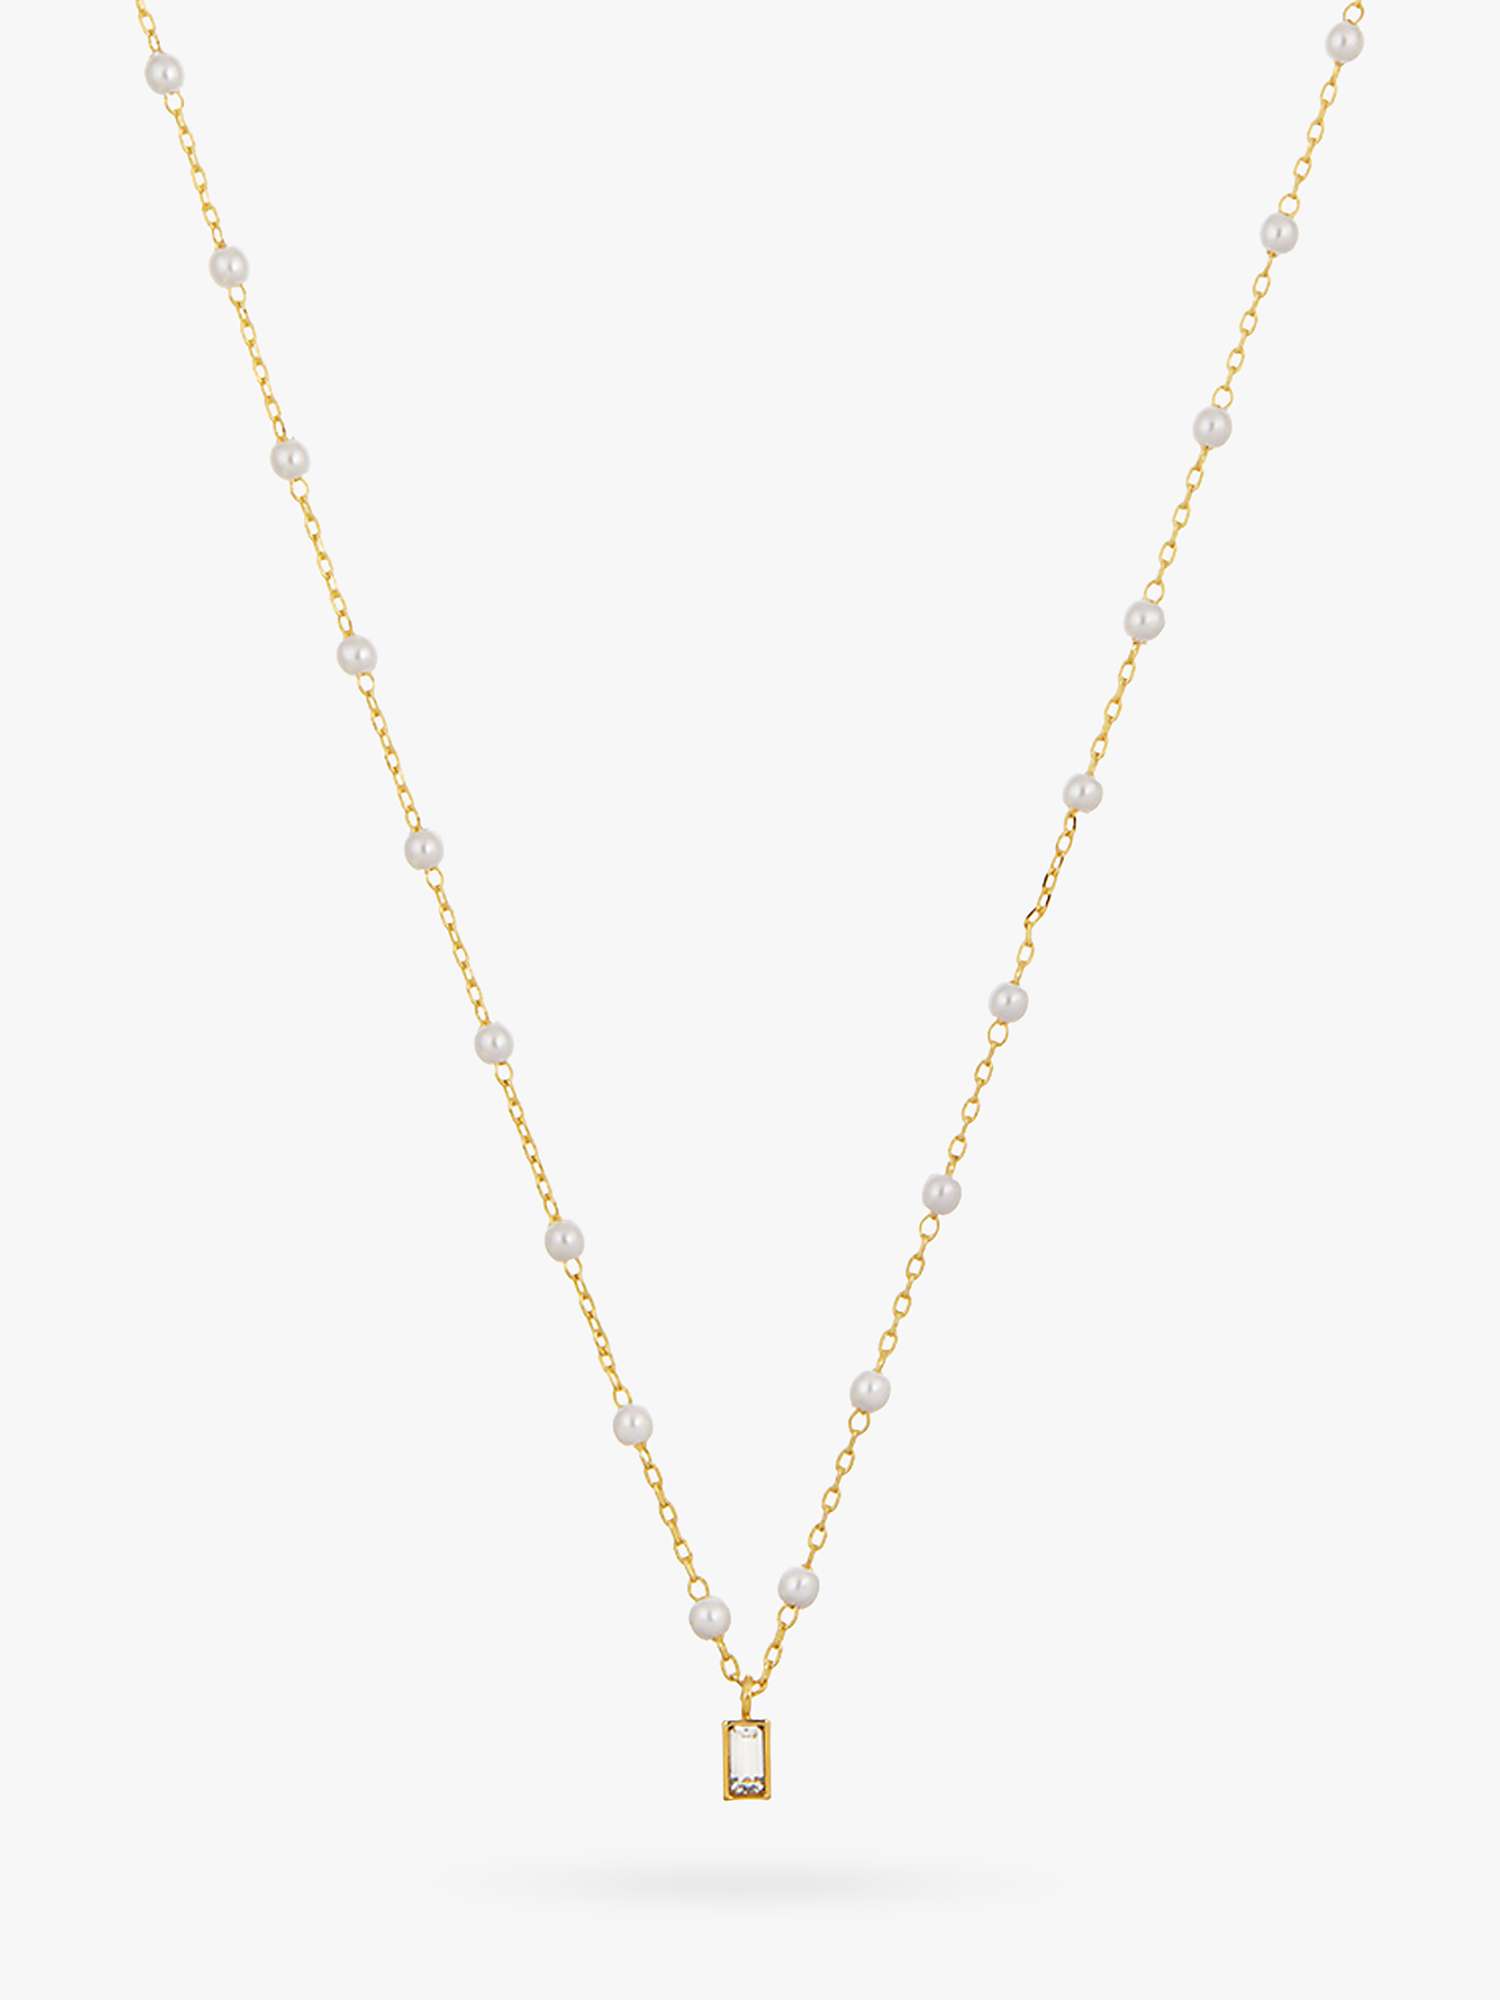 Buy Orelia Mini Swarovski Baguette Crystal and Pearl Chain Necklace, Gold/White Online at johnlewis.com